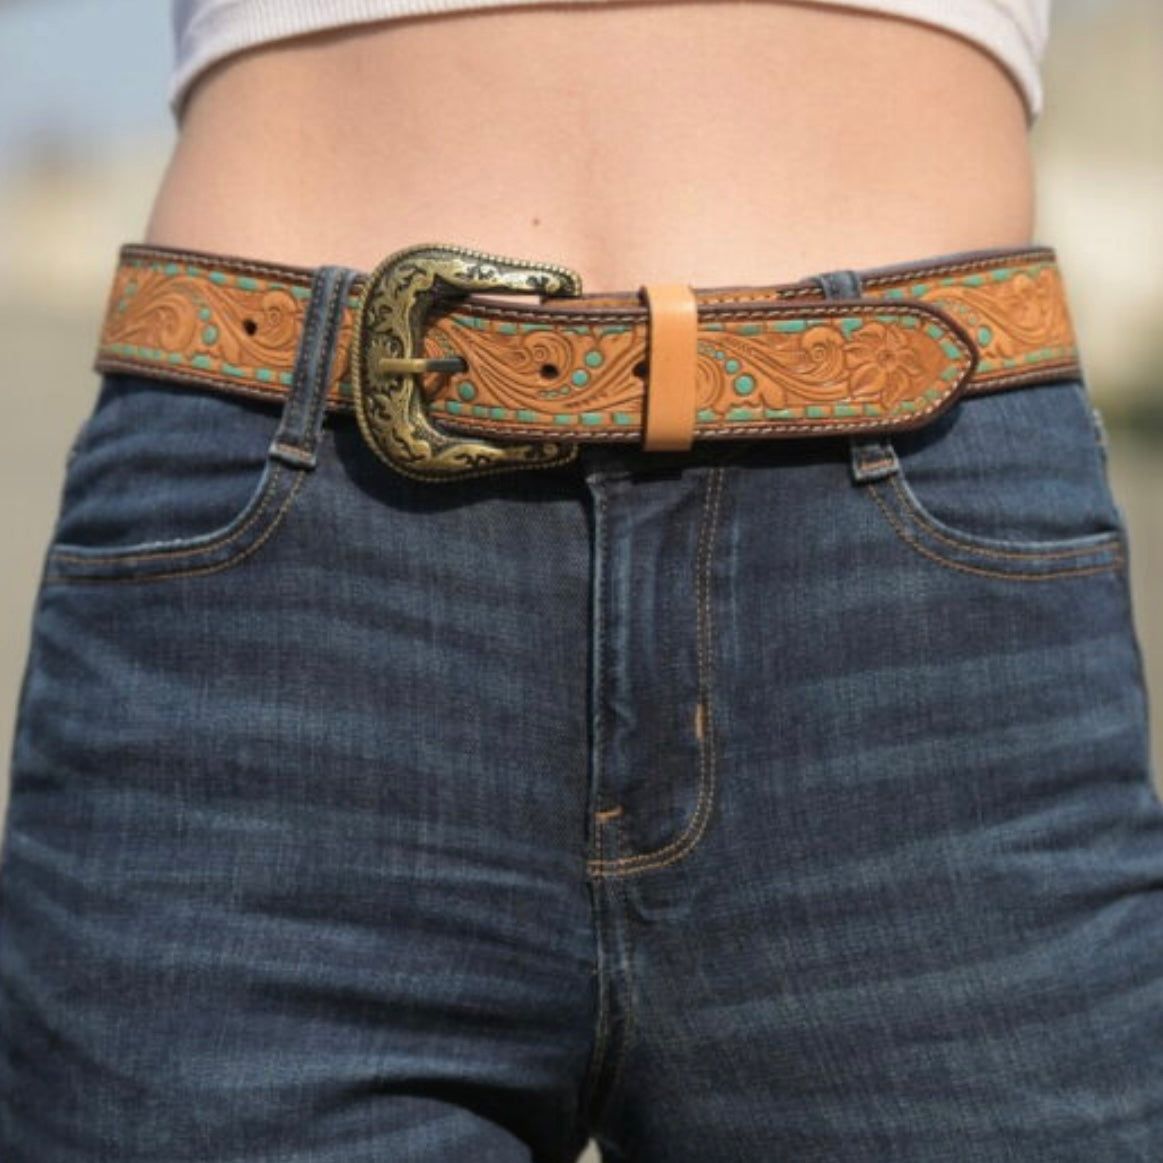 TURQUOISE BELT REMOVABLE BUCKLE 